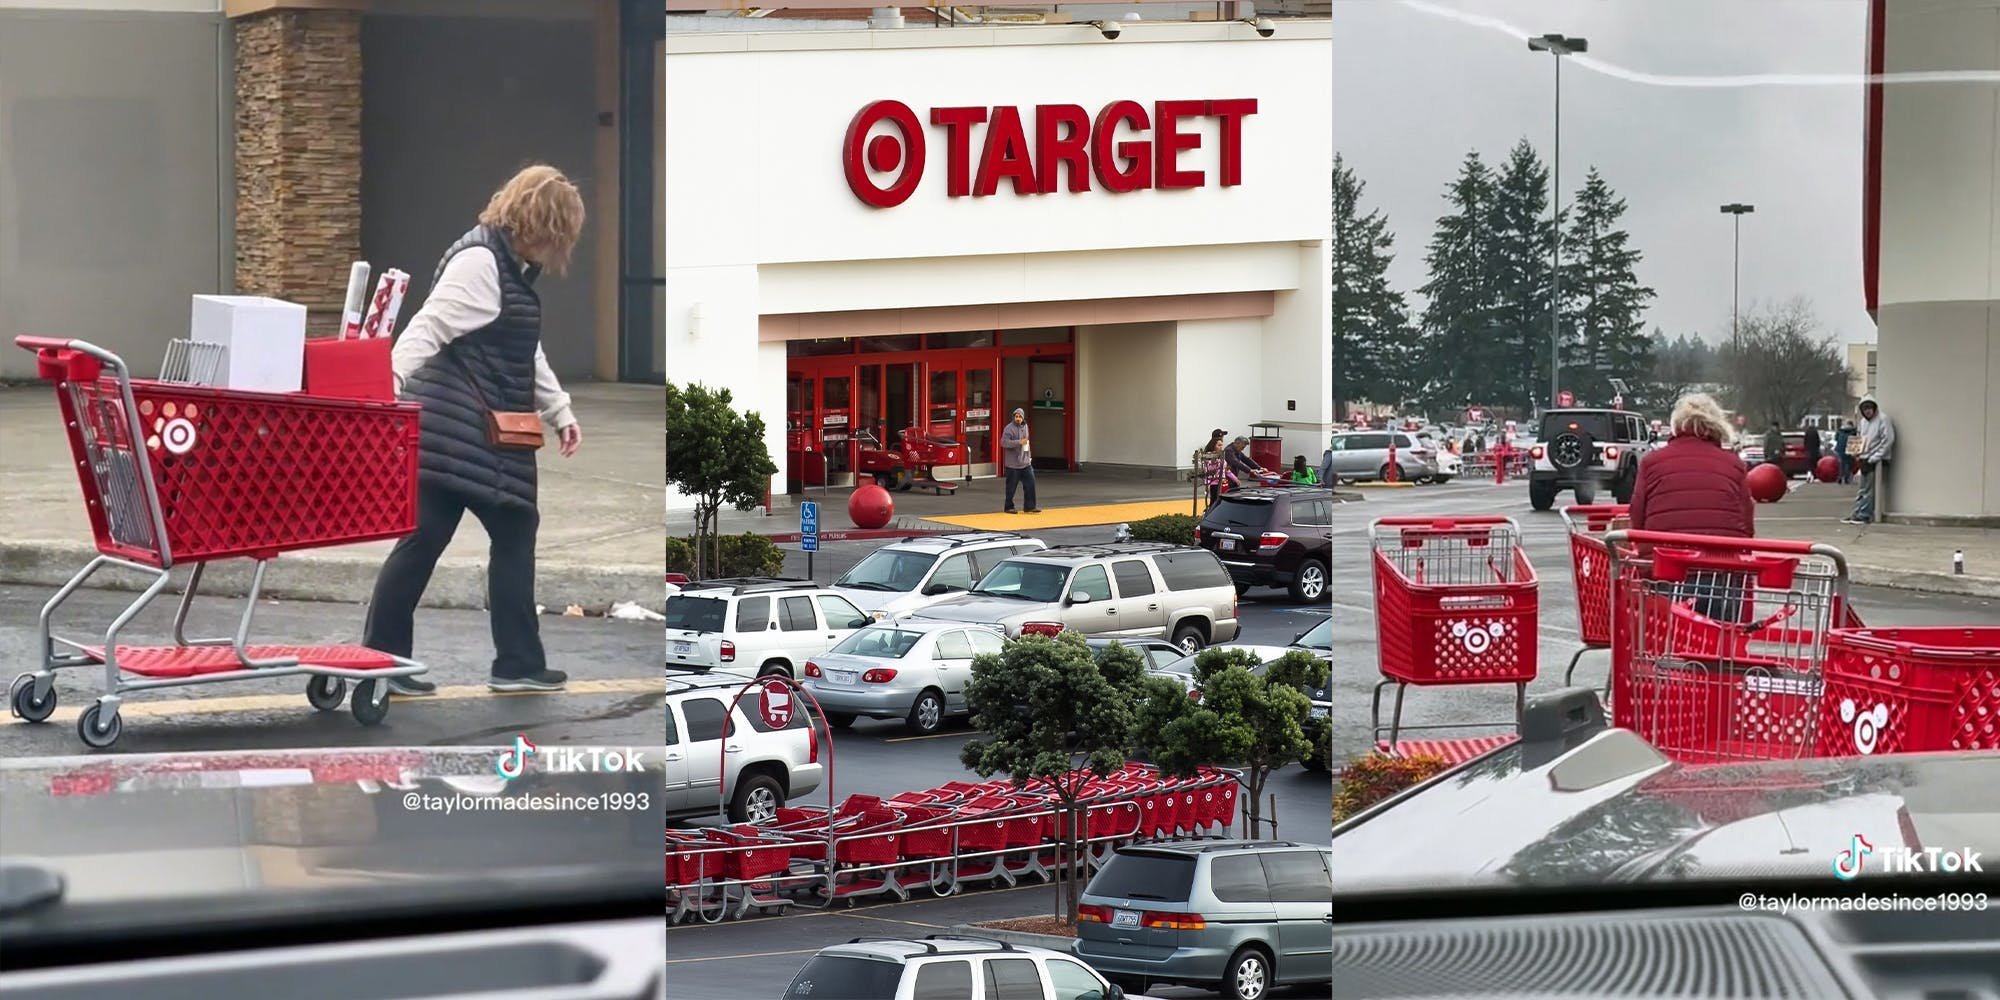 Target Customers Struggle With Anti-Theft Shopping Carts